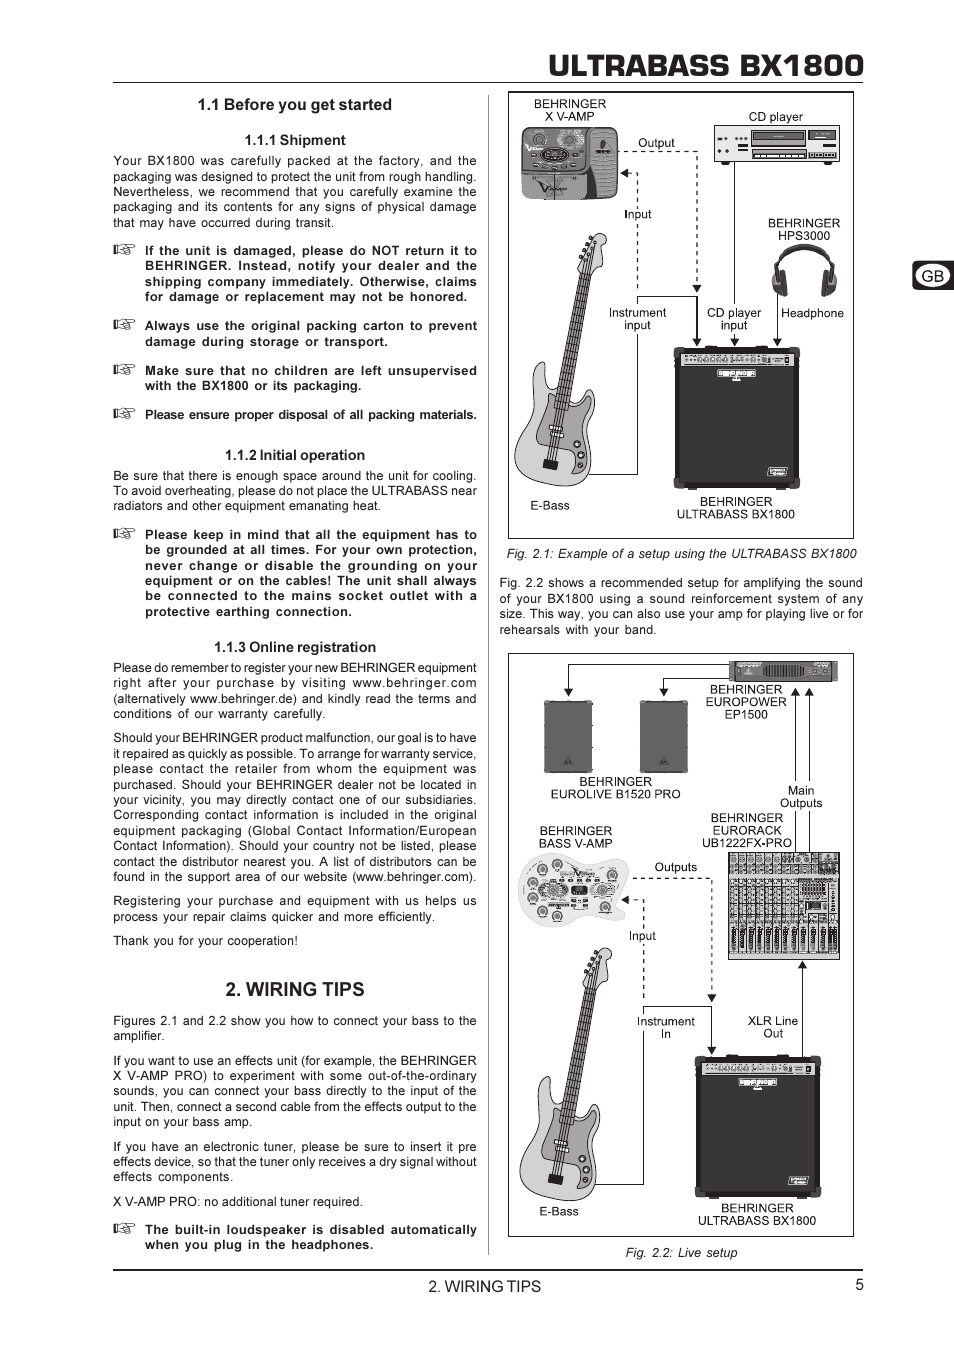 Ultrabass bx1800, Wiring tips | Behringer BX1800 User Manual | Page 5 / 8